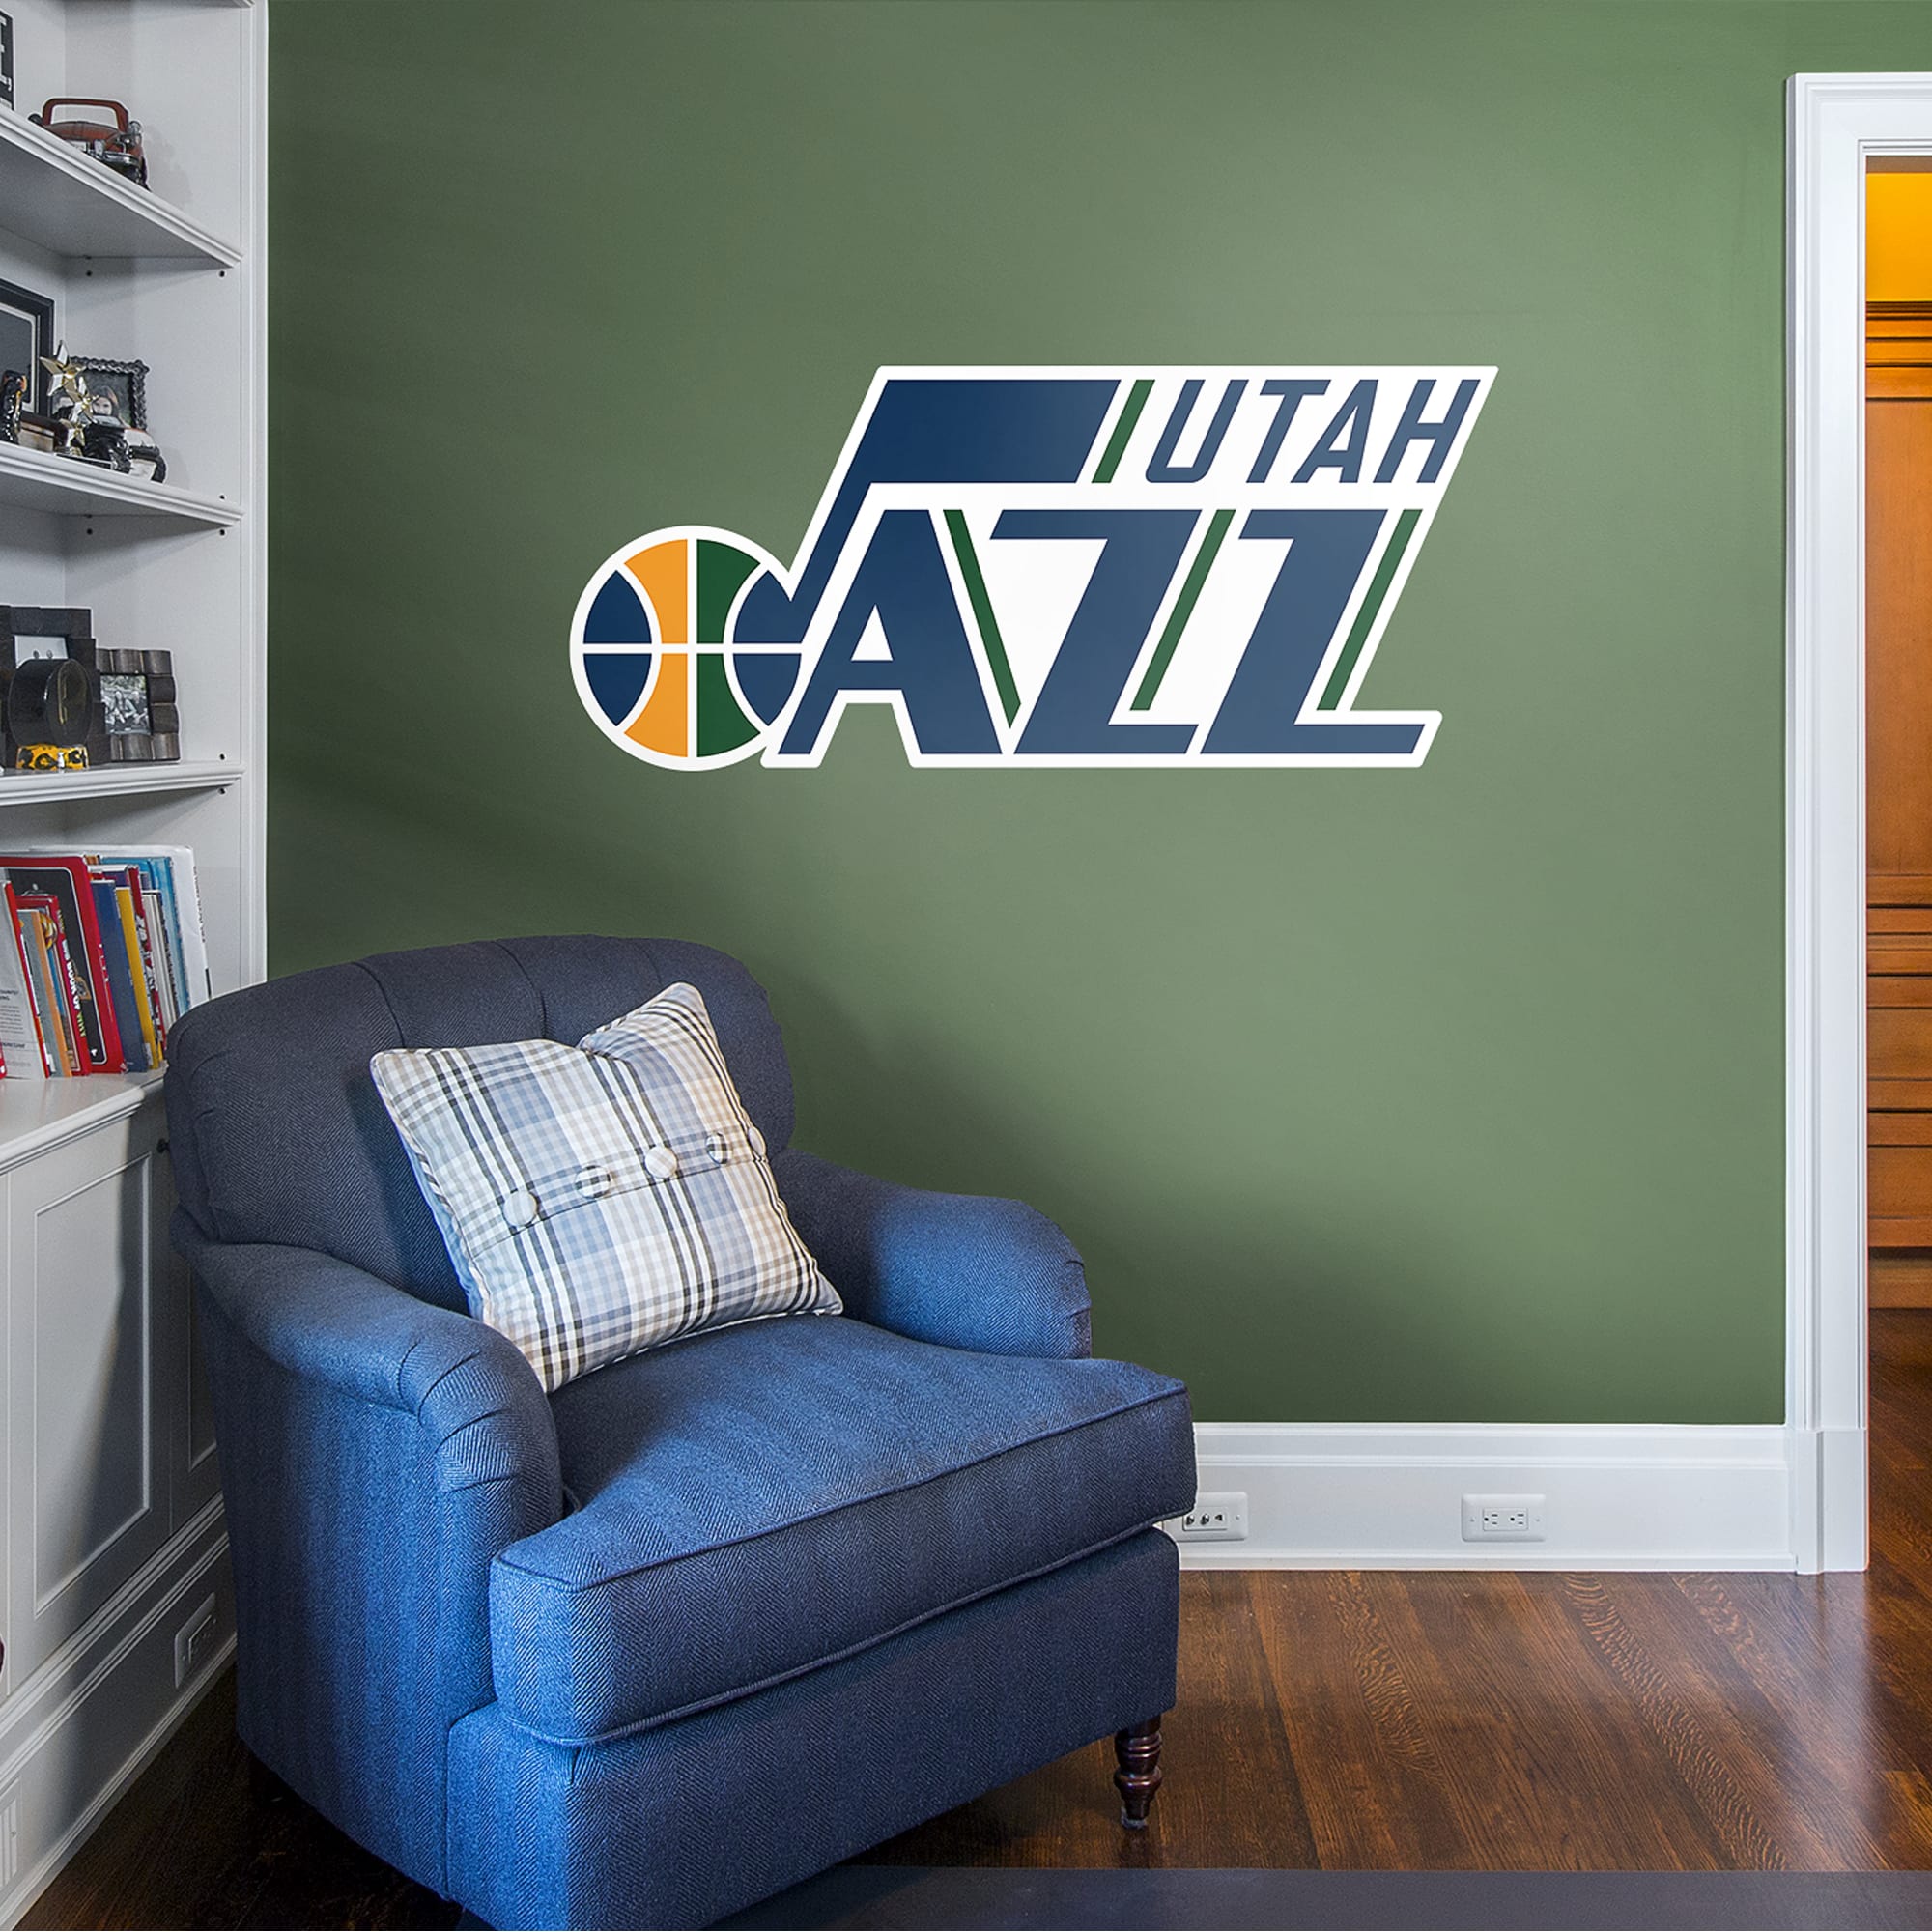 Utah Jazz: Logo - Officially Licensed NBA Removable Wall Decal 53.0"W x 24.0"H by Fathead | Vinyl